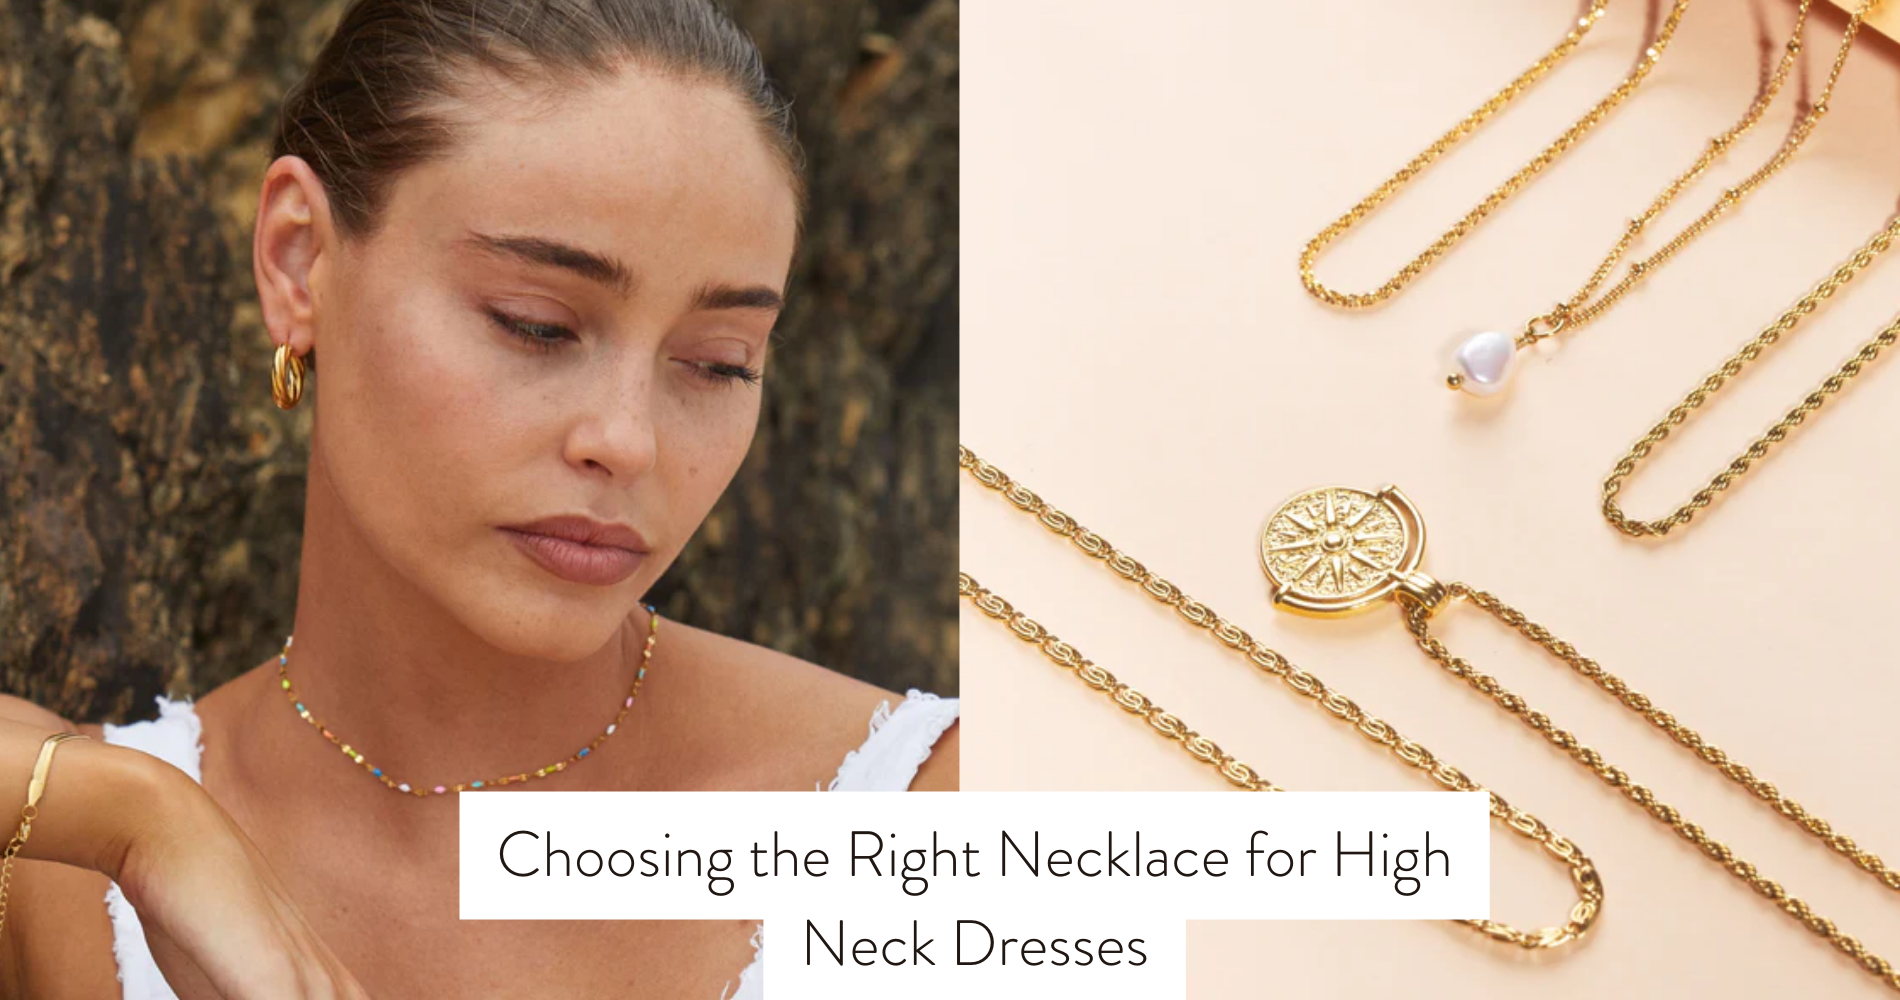 Choosing the Right Necklace for High Neck Dresses